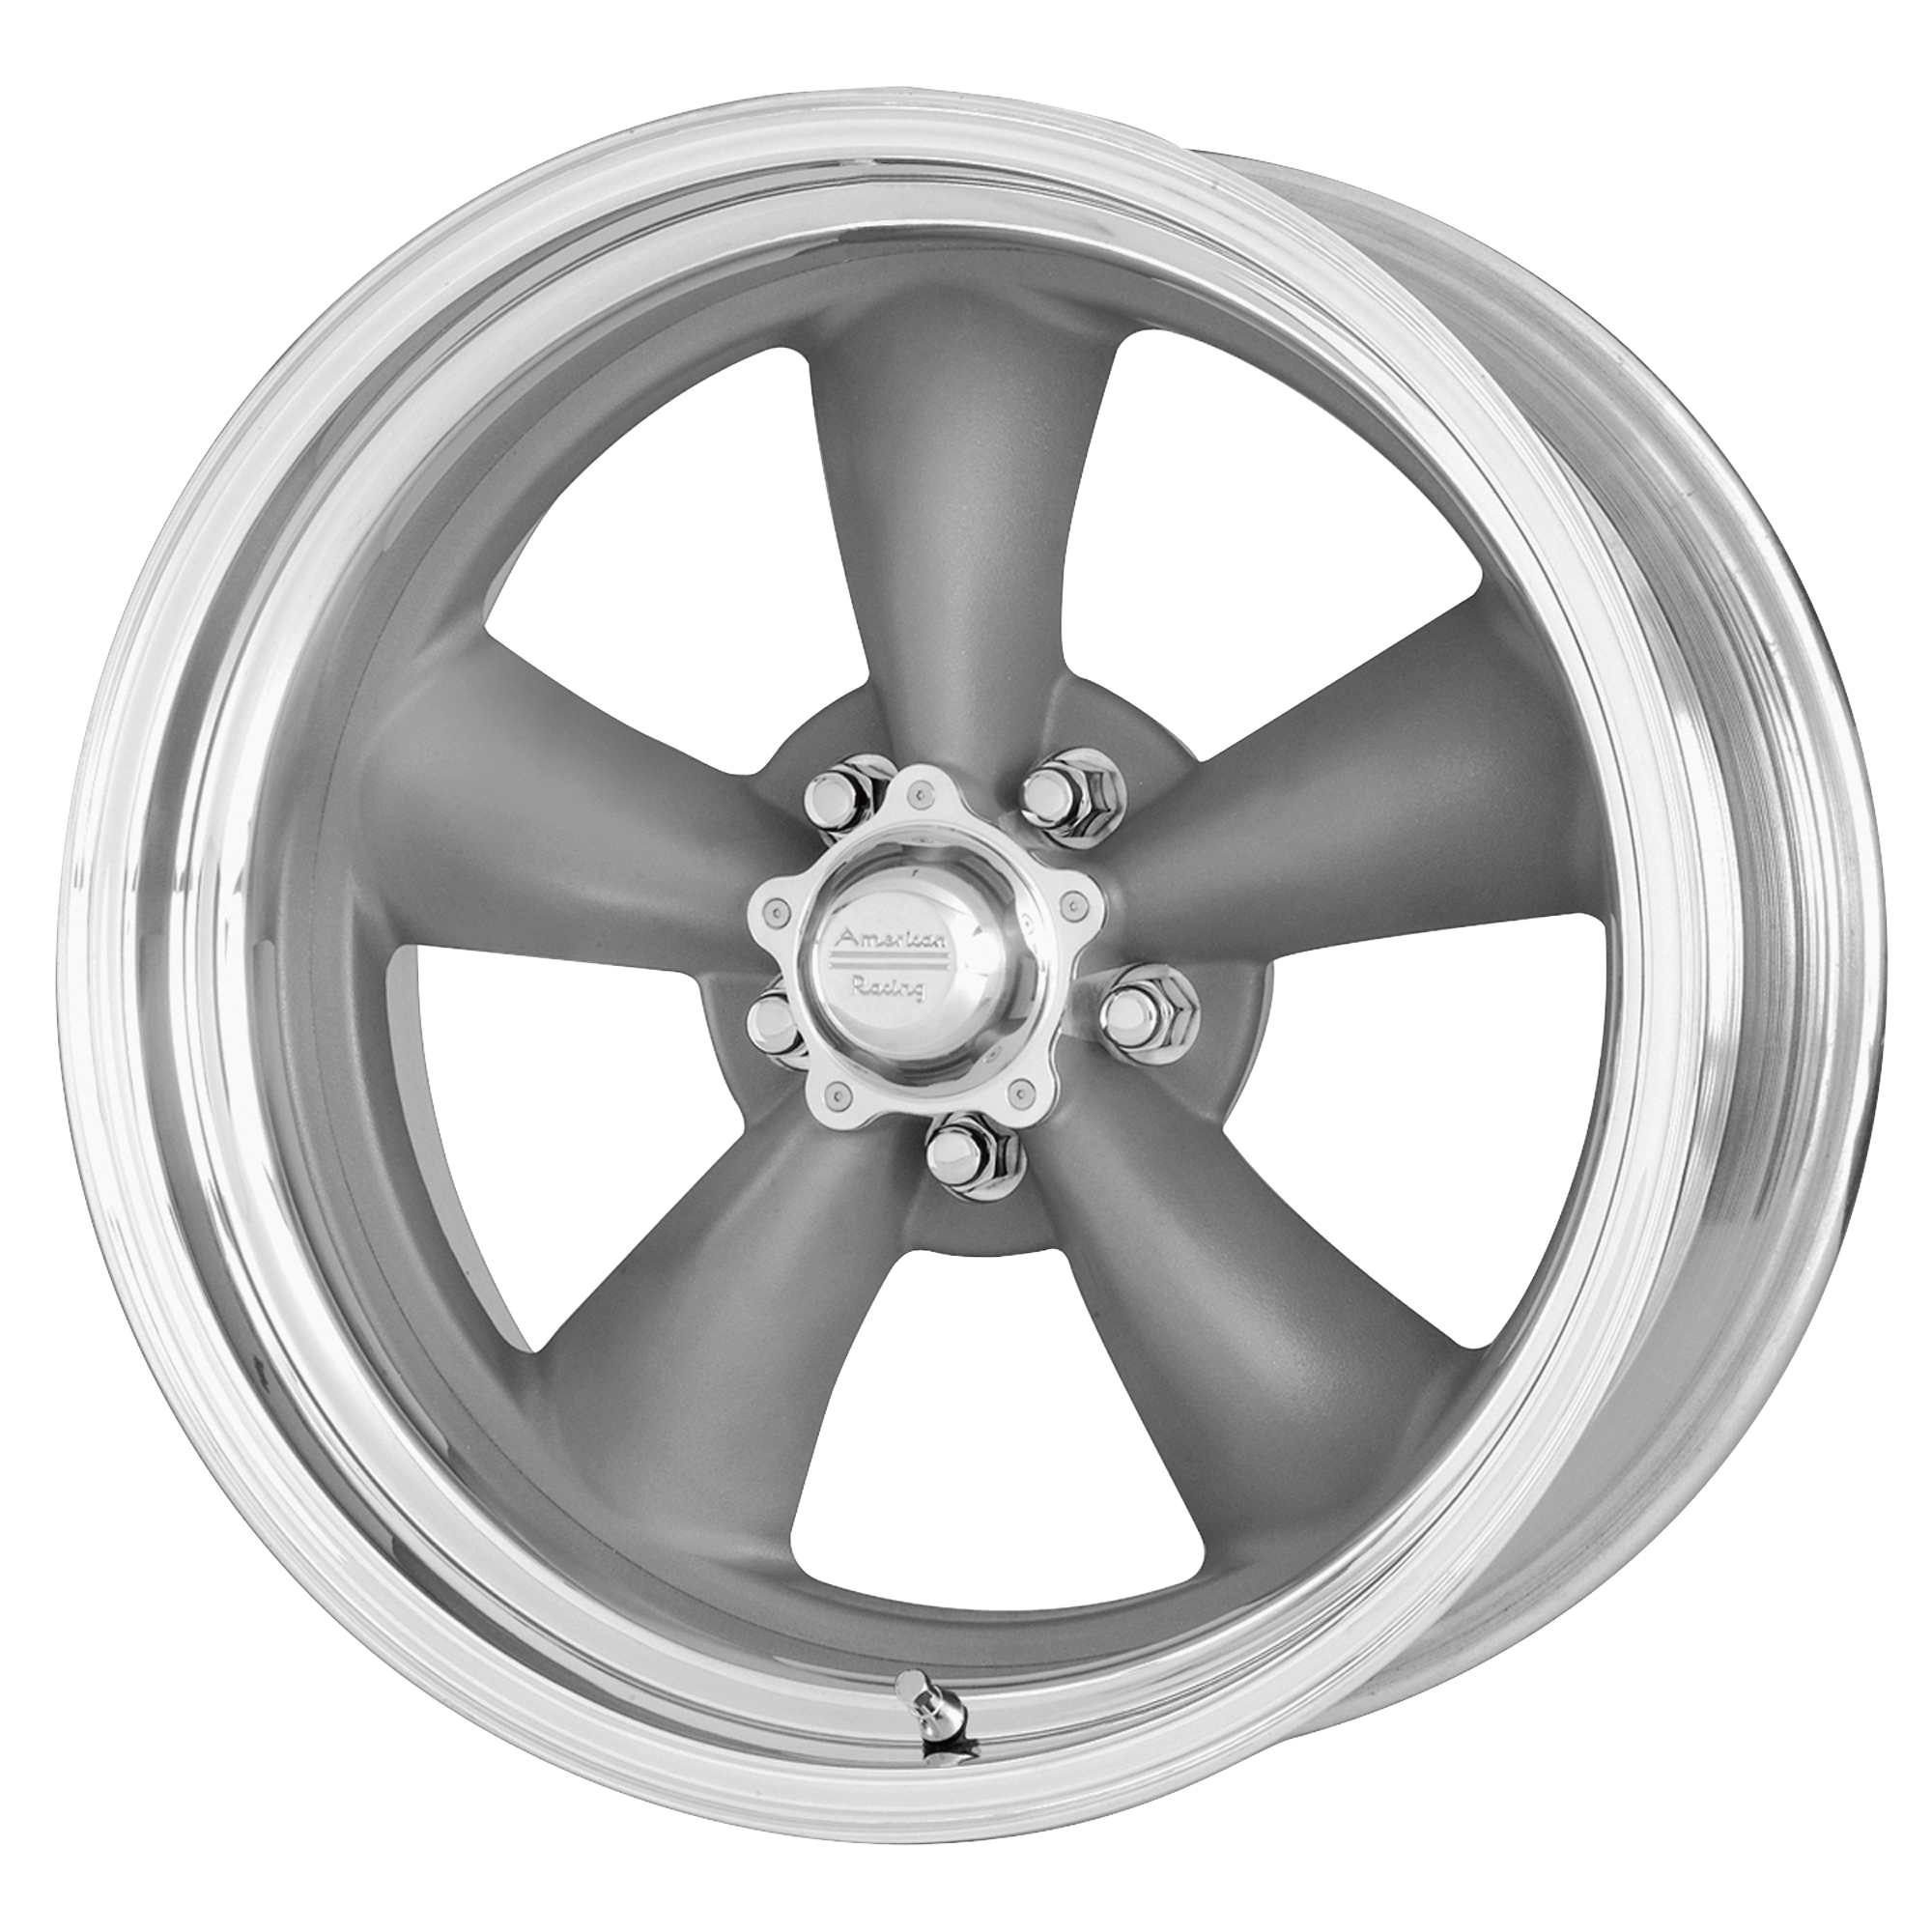 CLASSIC TORQ THRUST II ONE PIECE 14x6 5x114.30 MAG GRAY W/ MACHINED LIP (-2 mm) - Tires and Engine Performance